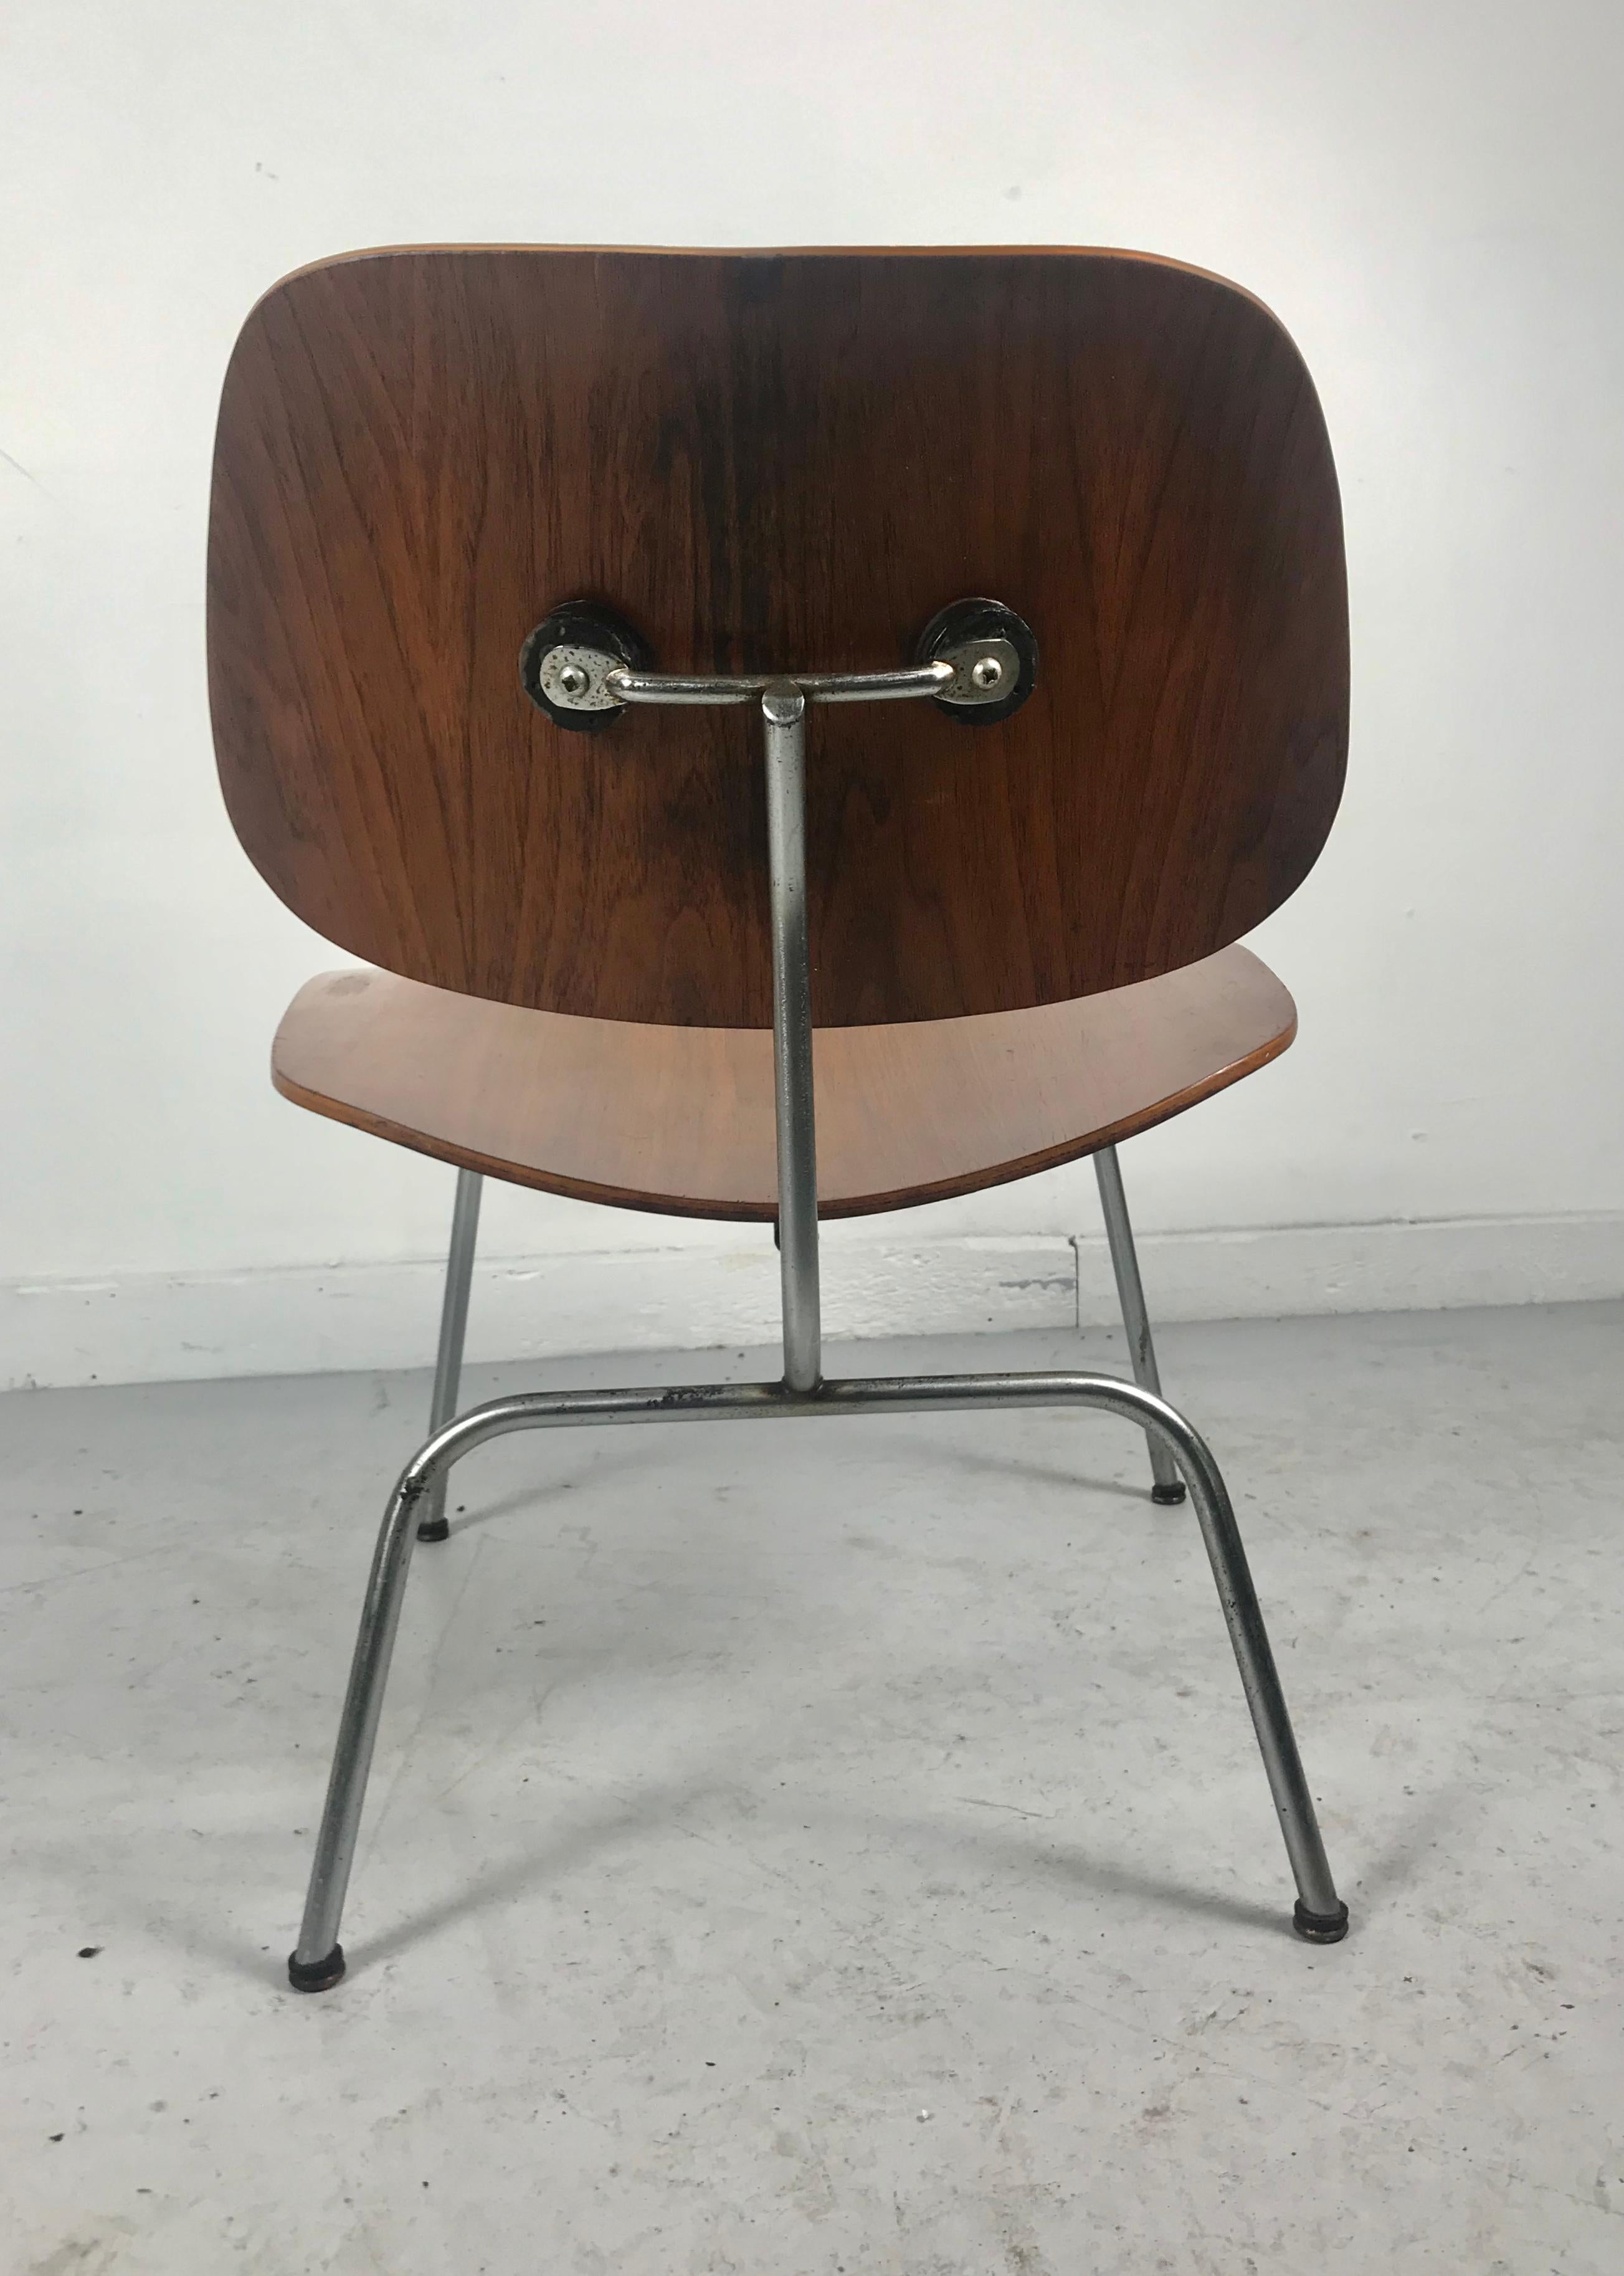 Mid-20th Century Early Production Charles Eames LCM 'Lounge Chair Metal', Original Label